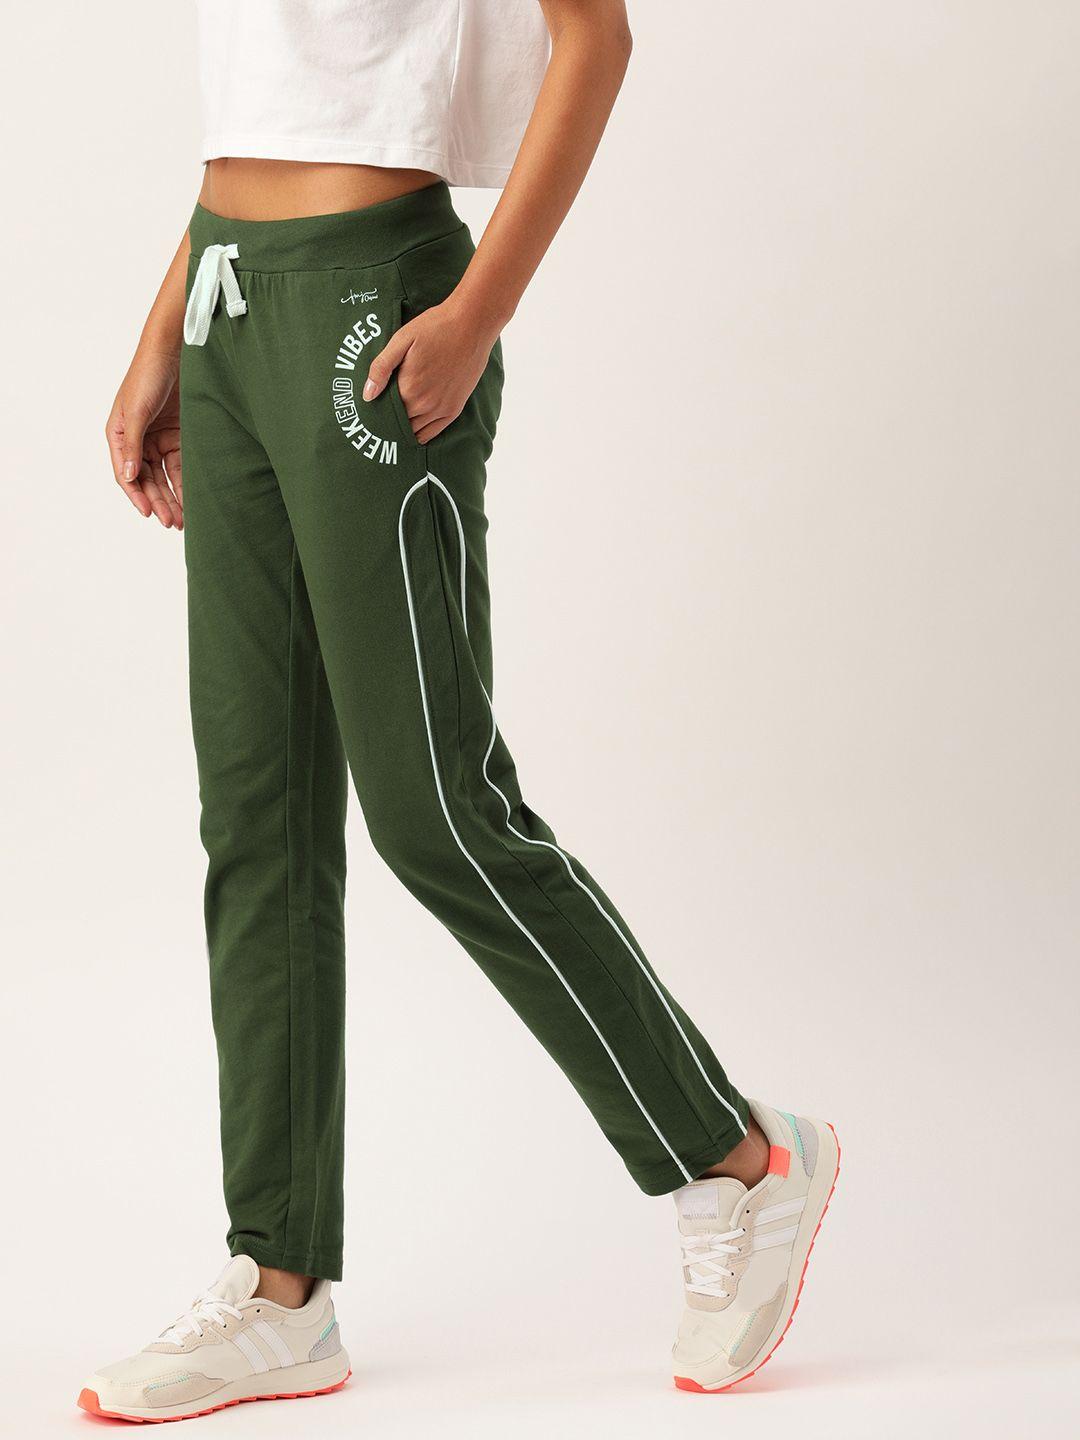 flying-machine-women-olive-green-solid-cotton-track-pants